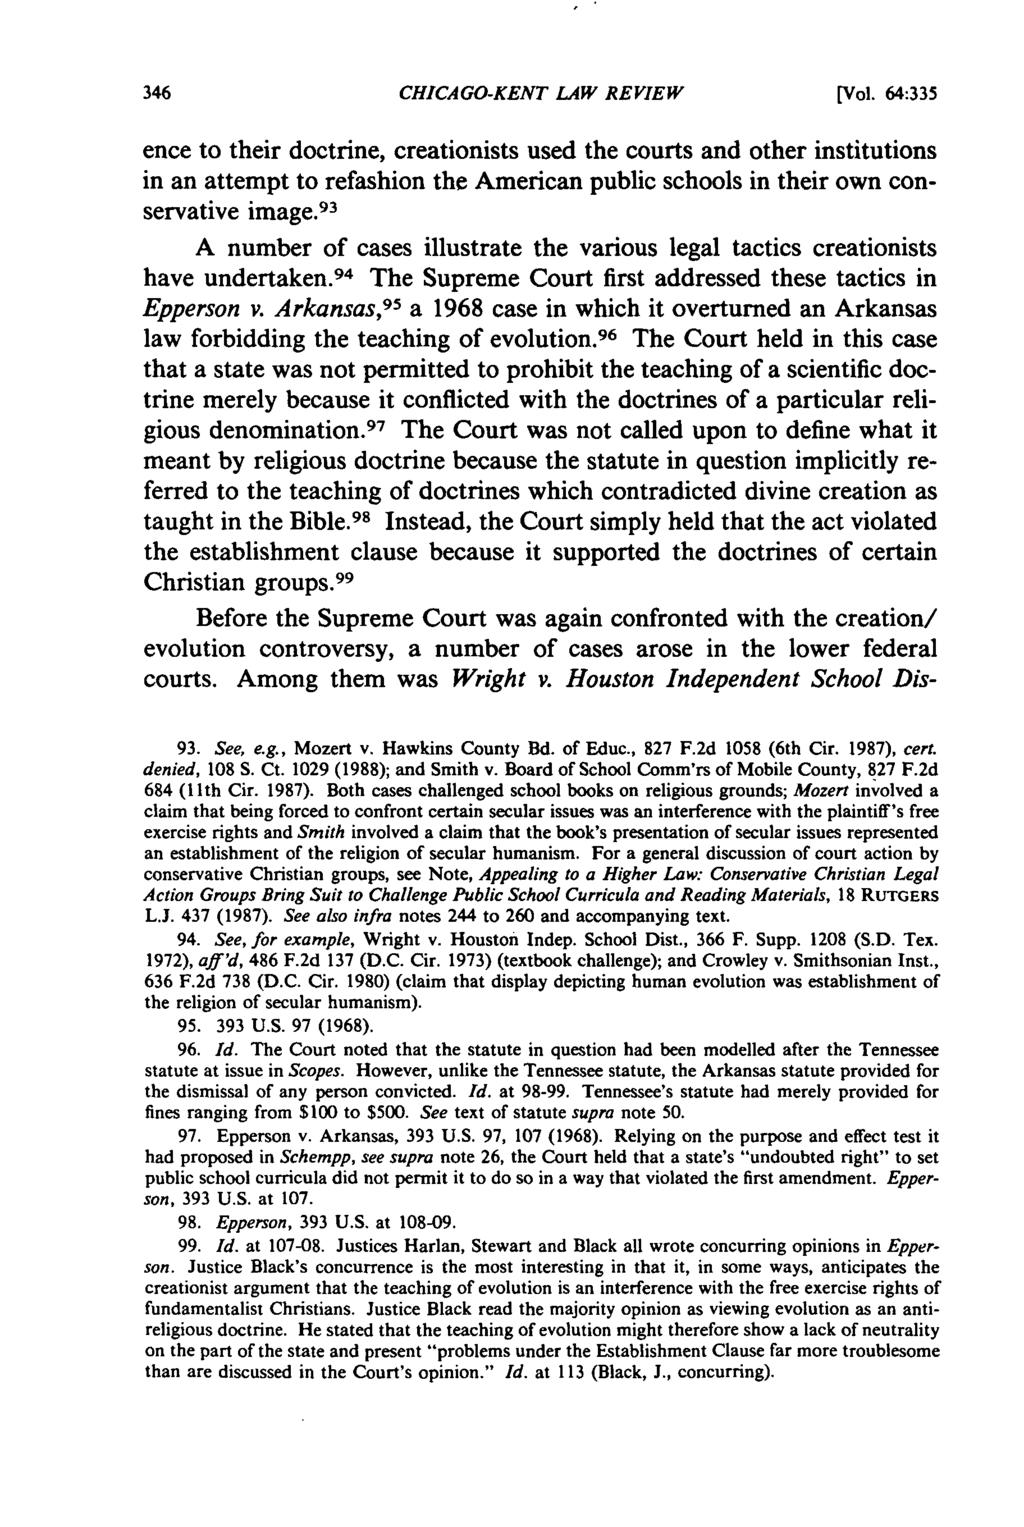 CHICAGO-KENT LAW REVIEW [Vol. 64:335 ence to their doctrine, creationists used the courts and other institutions in an attempt to refashion the American public schools in their own conservative image.